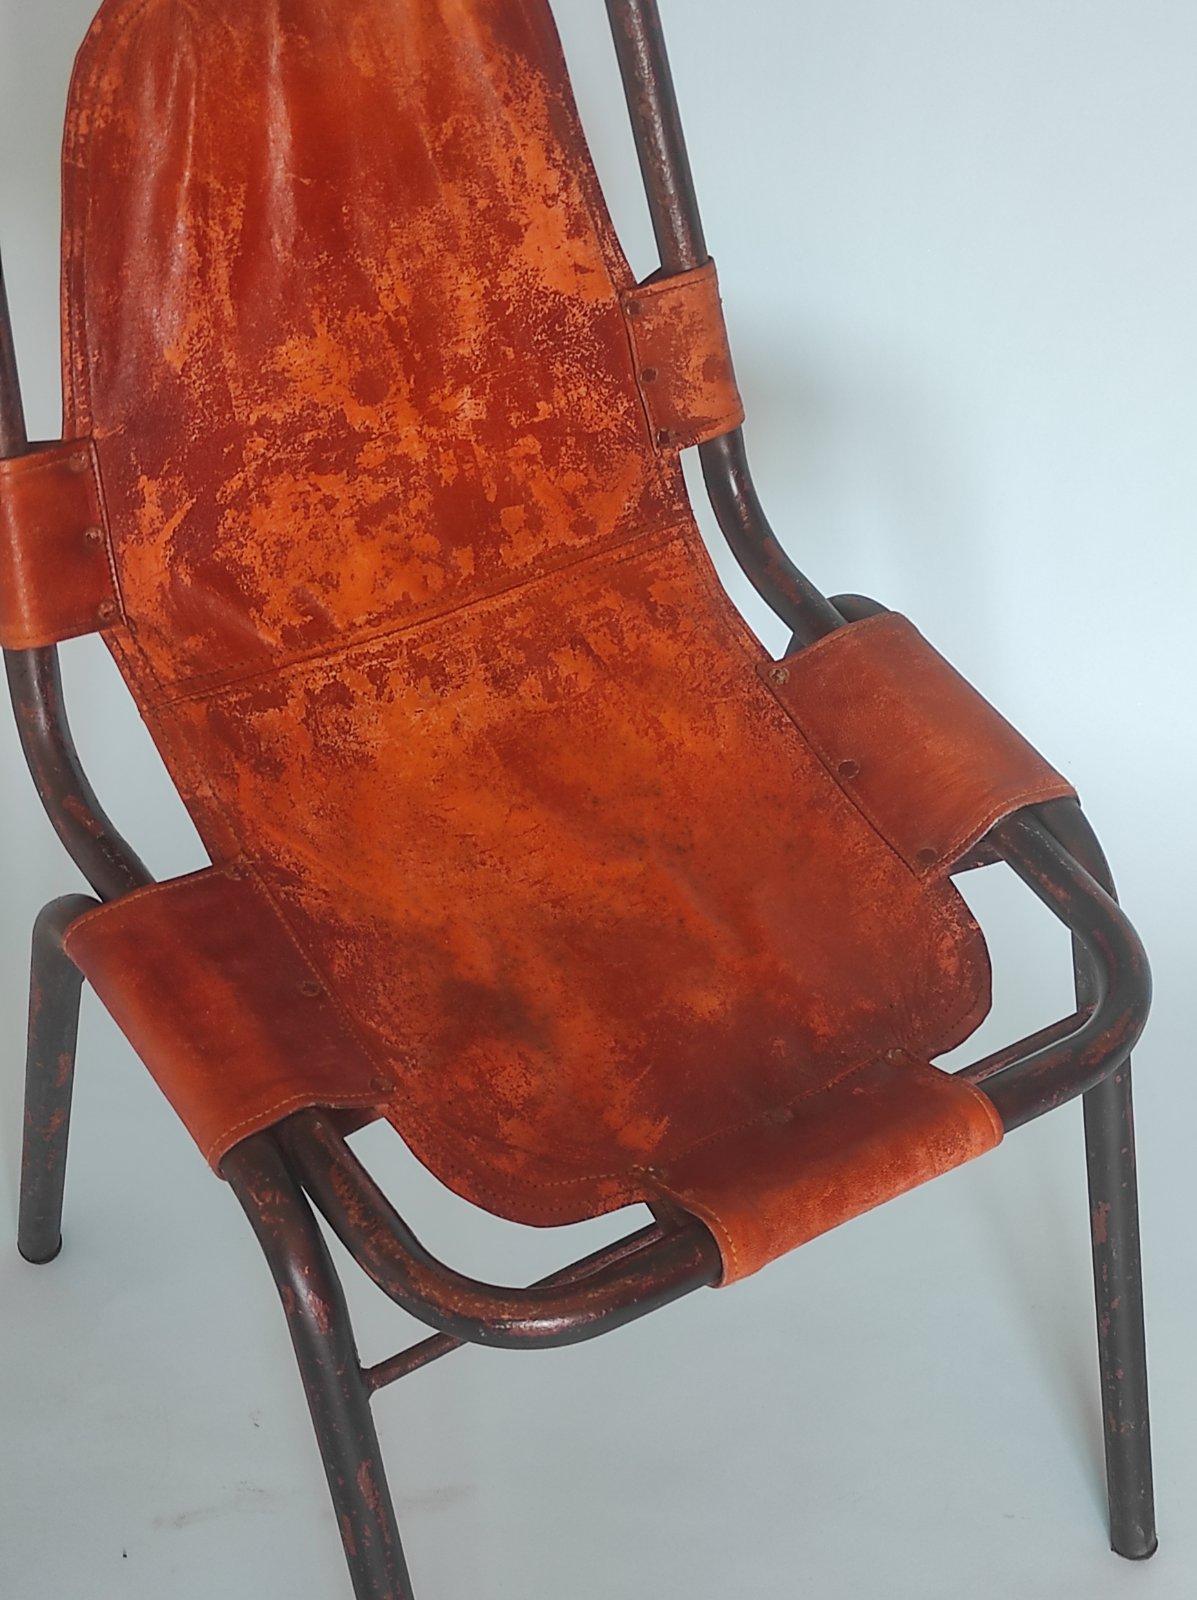 Metal One of Two DalVera Les Arcs Chair 1960s For Sale